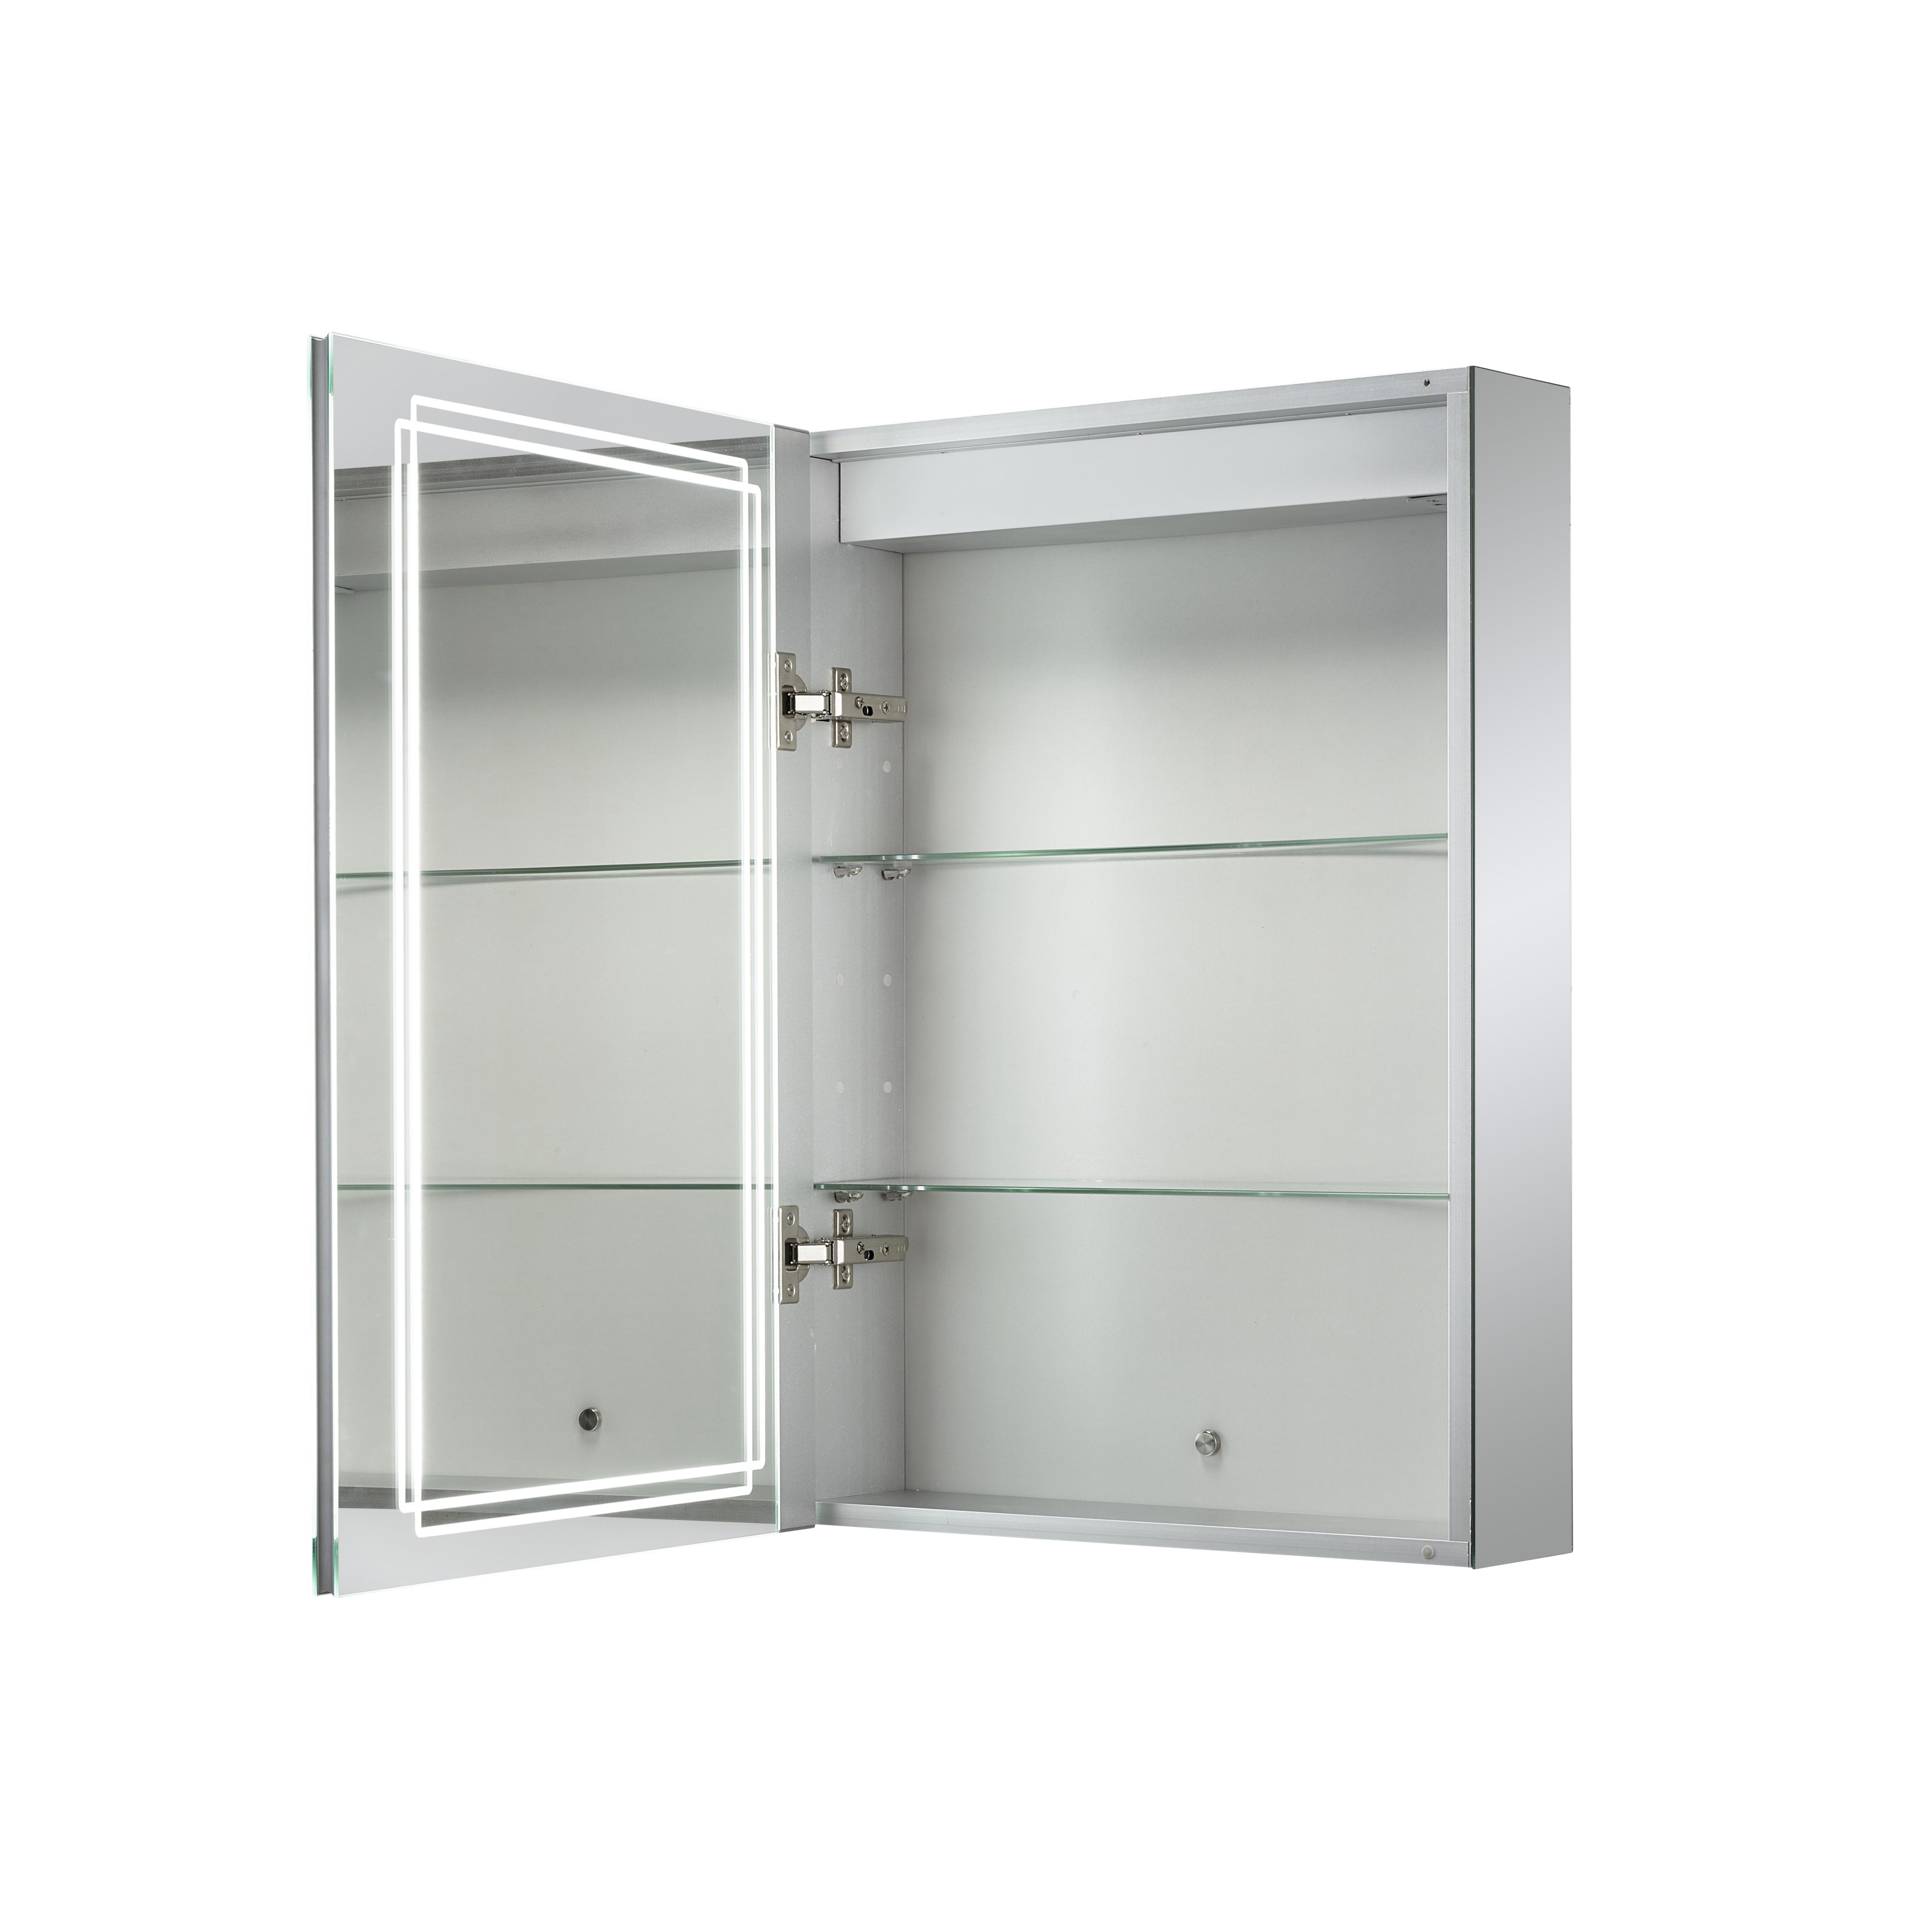 Sensio Harlow Wall-mounted Illuminated Mirrored Bathroom Cabinet with shaver socket (W)500mm (H)700mm